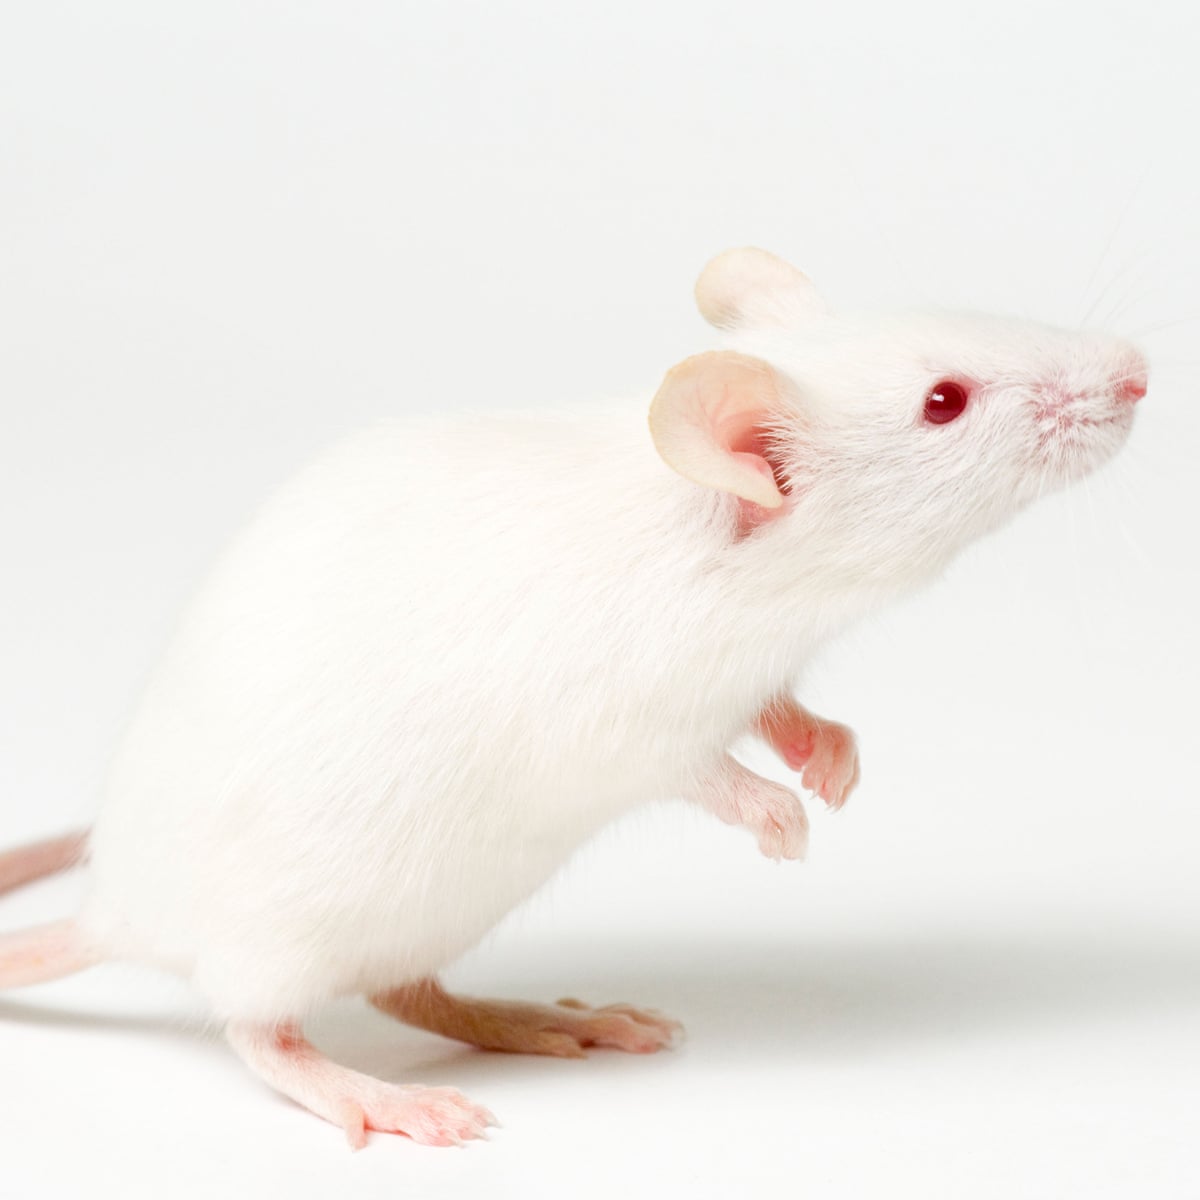 Can mice change gender?